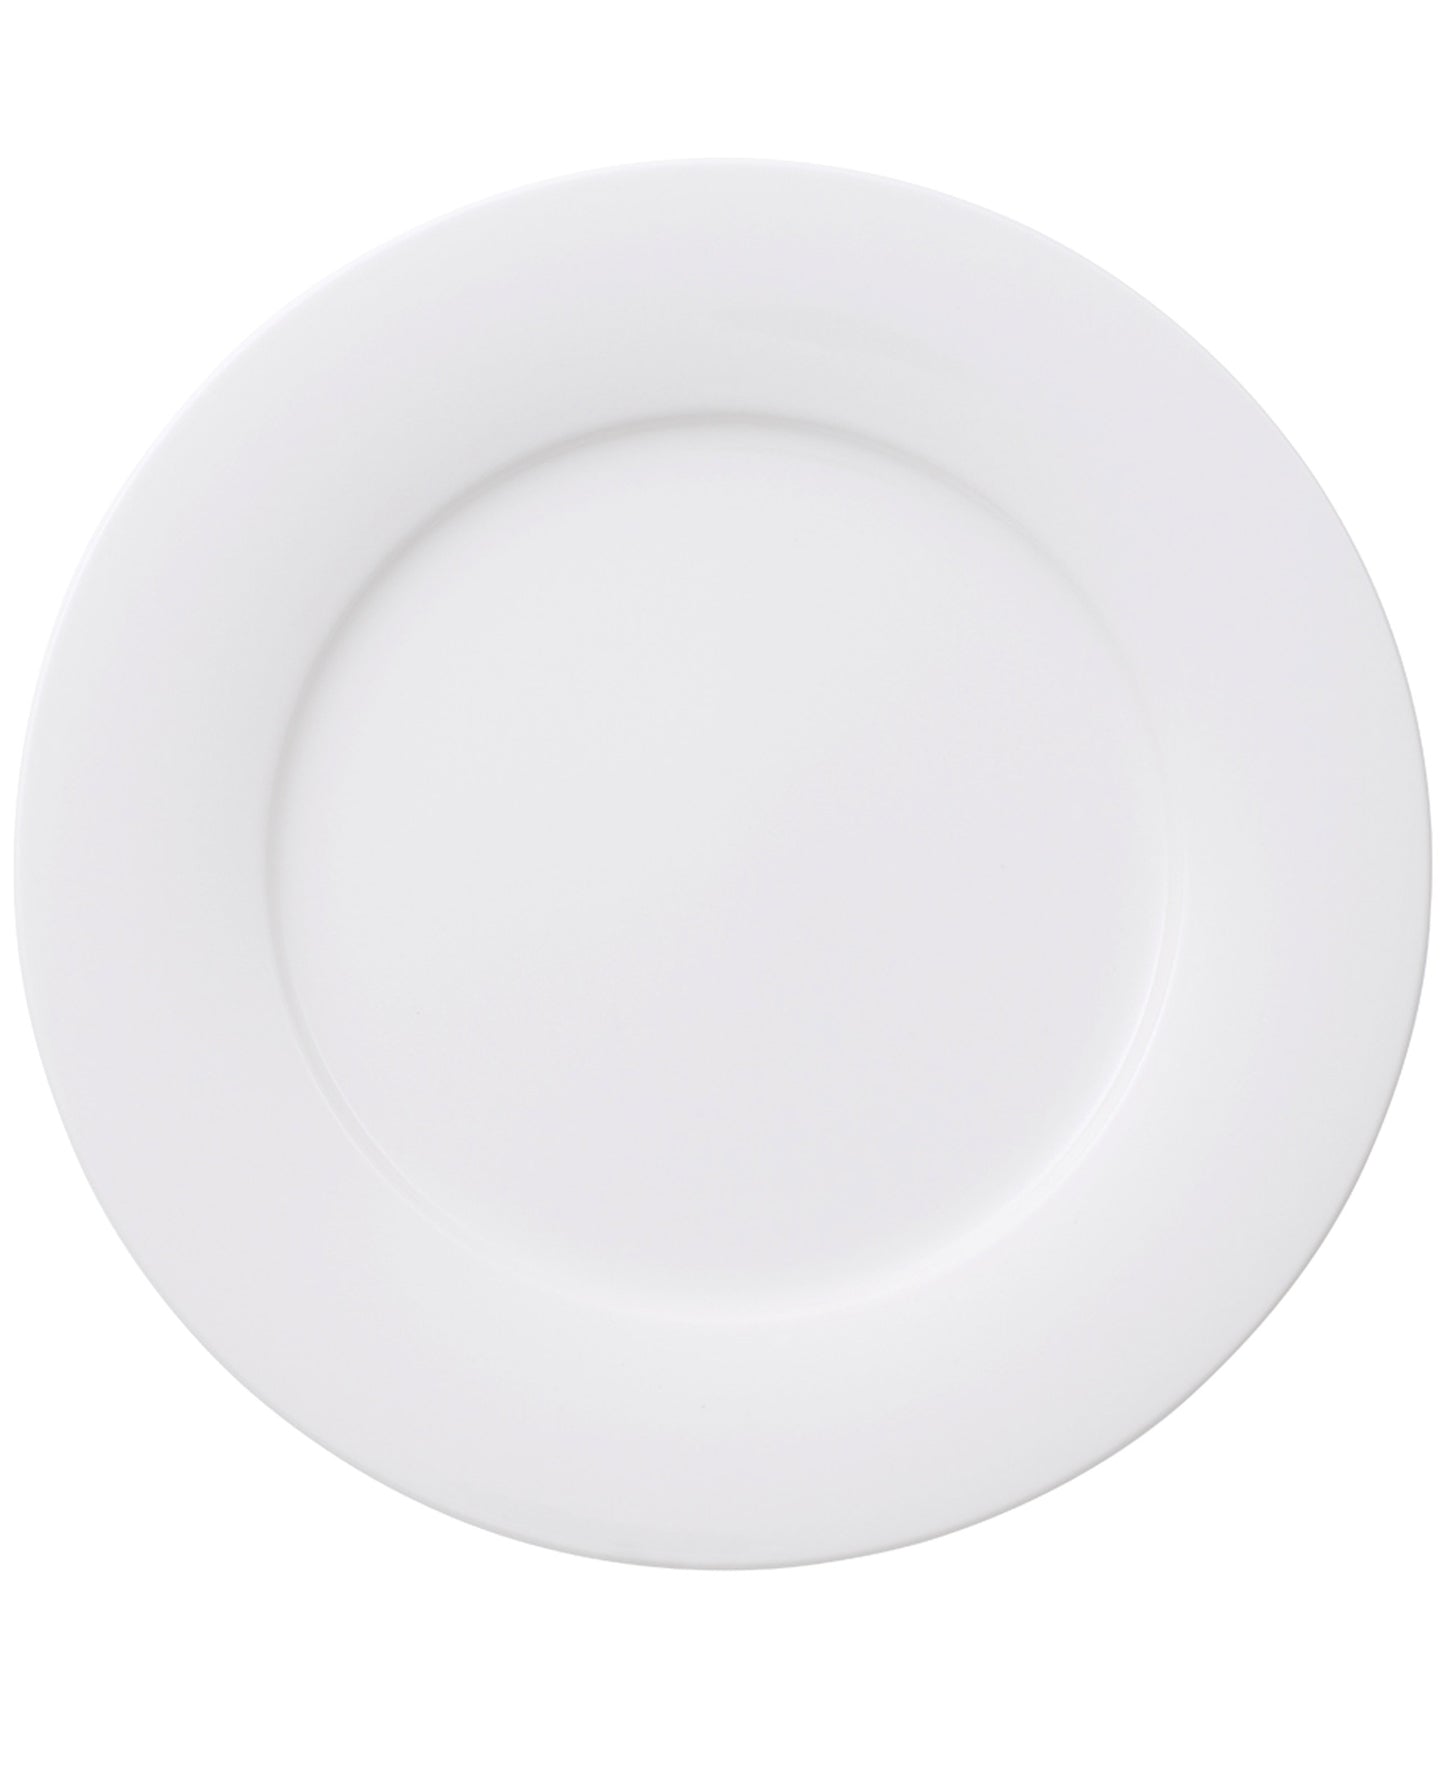 Affinity Flat Plate, 6.2"